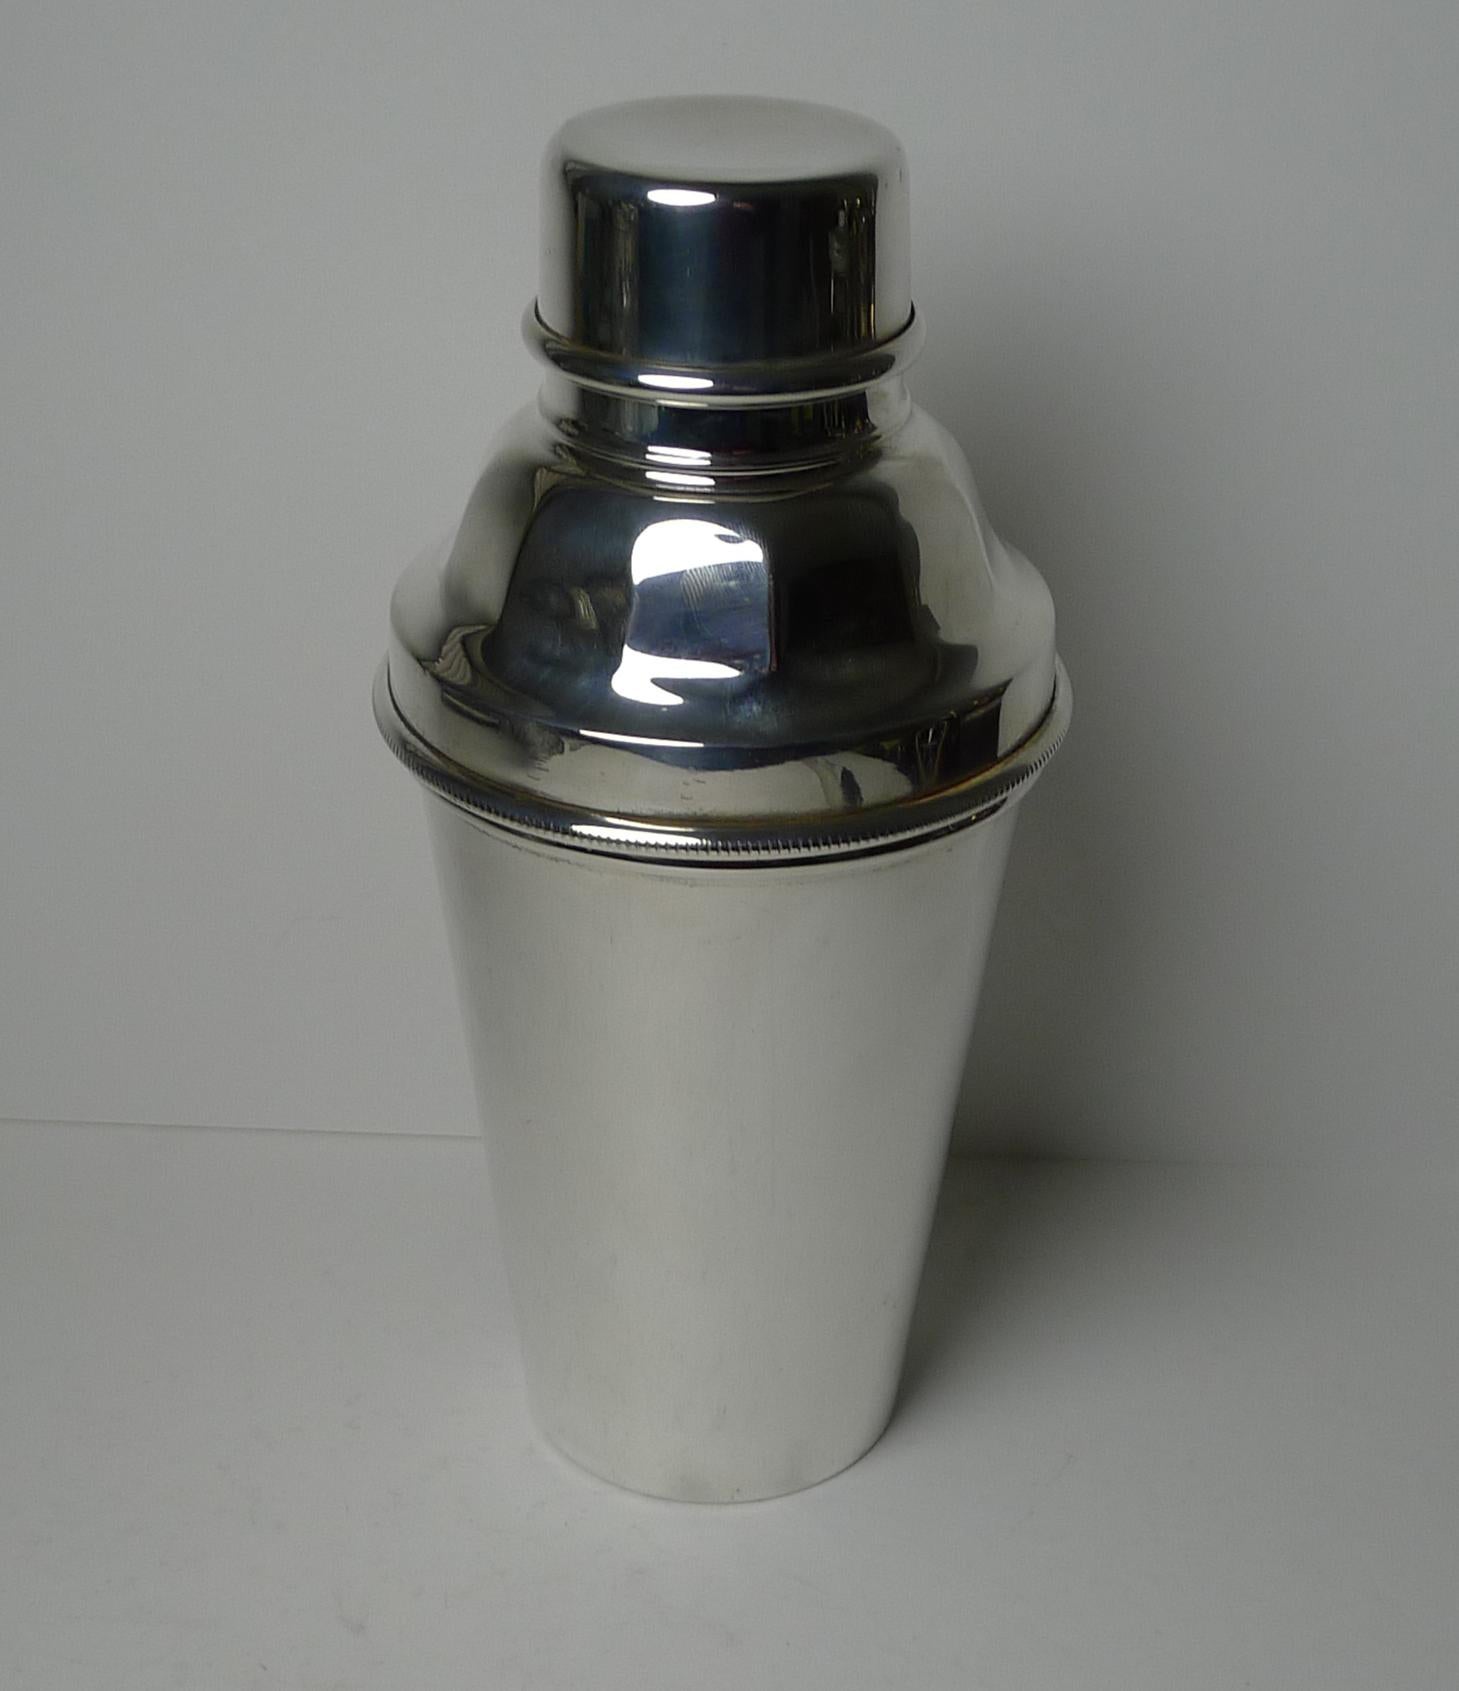 A very handsome English silver plated cocktail shaker, Art Deco in era, dating to circa 1940.

The top portion is unusual with faceted design. Inside of this top section is an integral Lemon Squeezer or Reamer; always highly sought-after.

Just